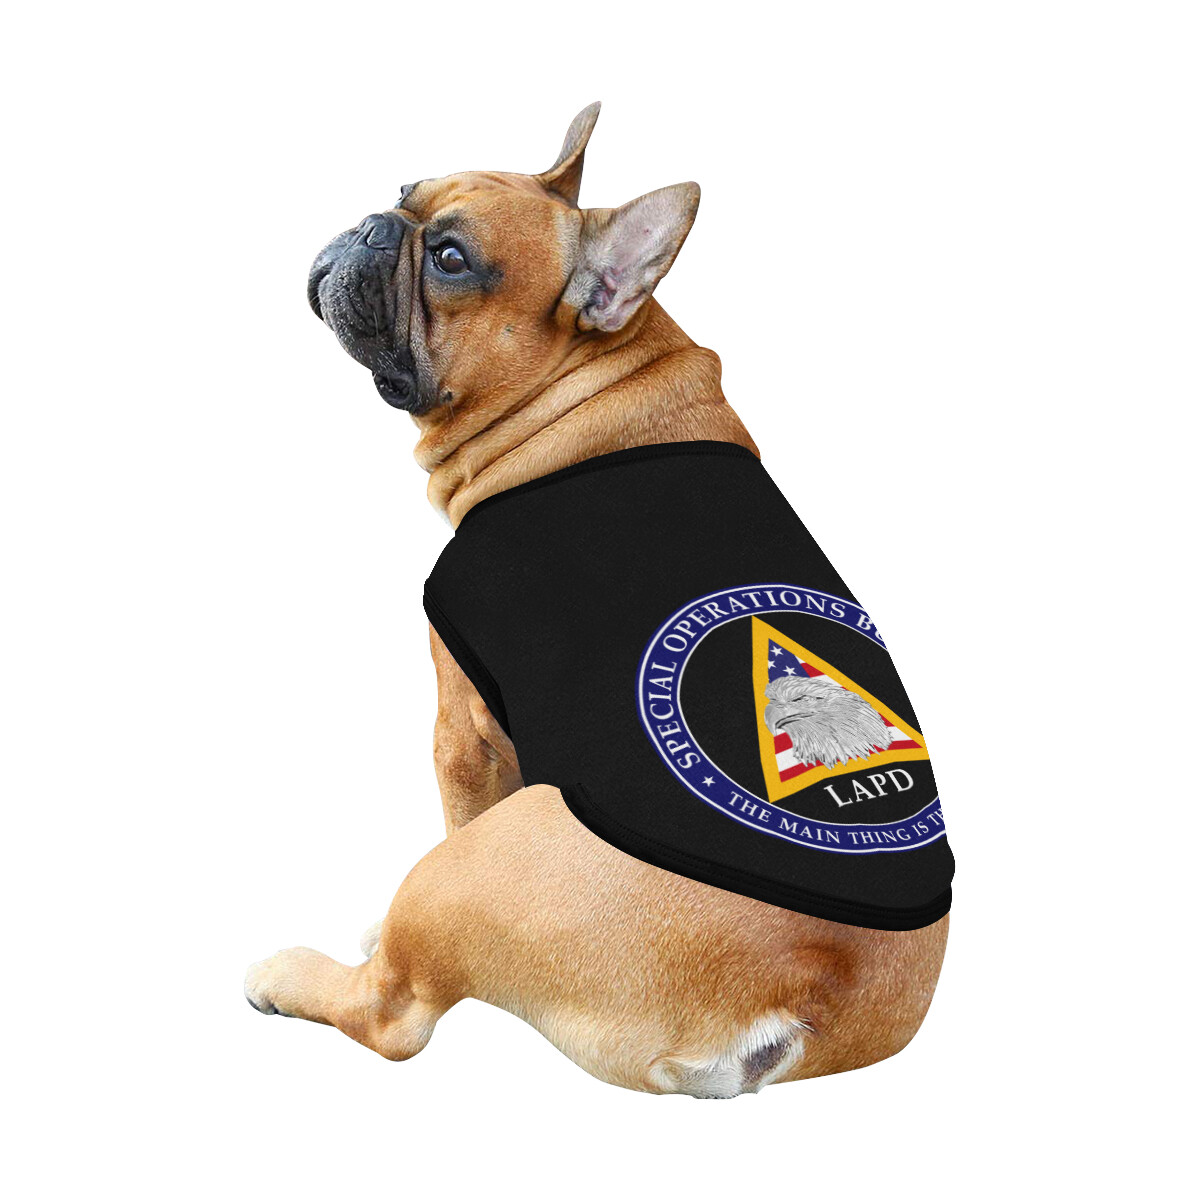 🐕 Special Operations LAPD Los Angeles Police Department Dog shirt, Dog Tank Top, Dog t-shirt, Dog clothes, Gifts, front back print, 7 sizes XS to 3XL, dog gifts, black